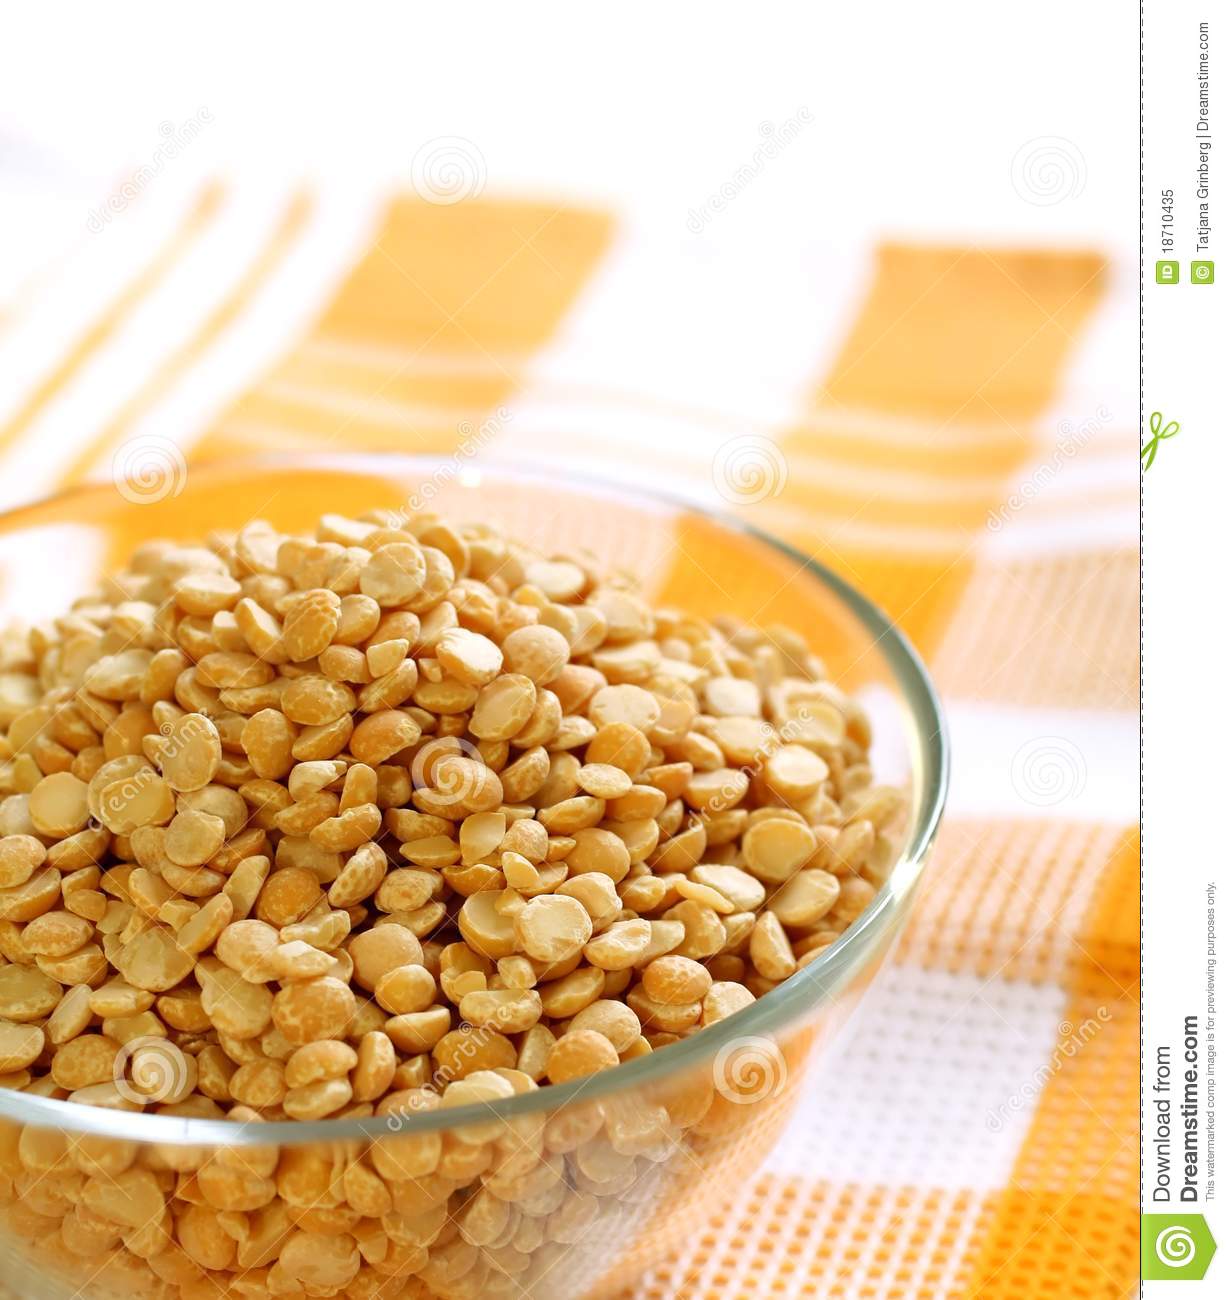 More Similar Stock Images Of   Peas In Glass Bowl On Table